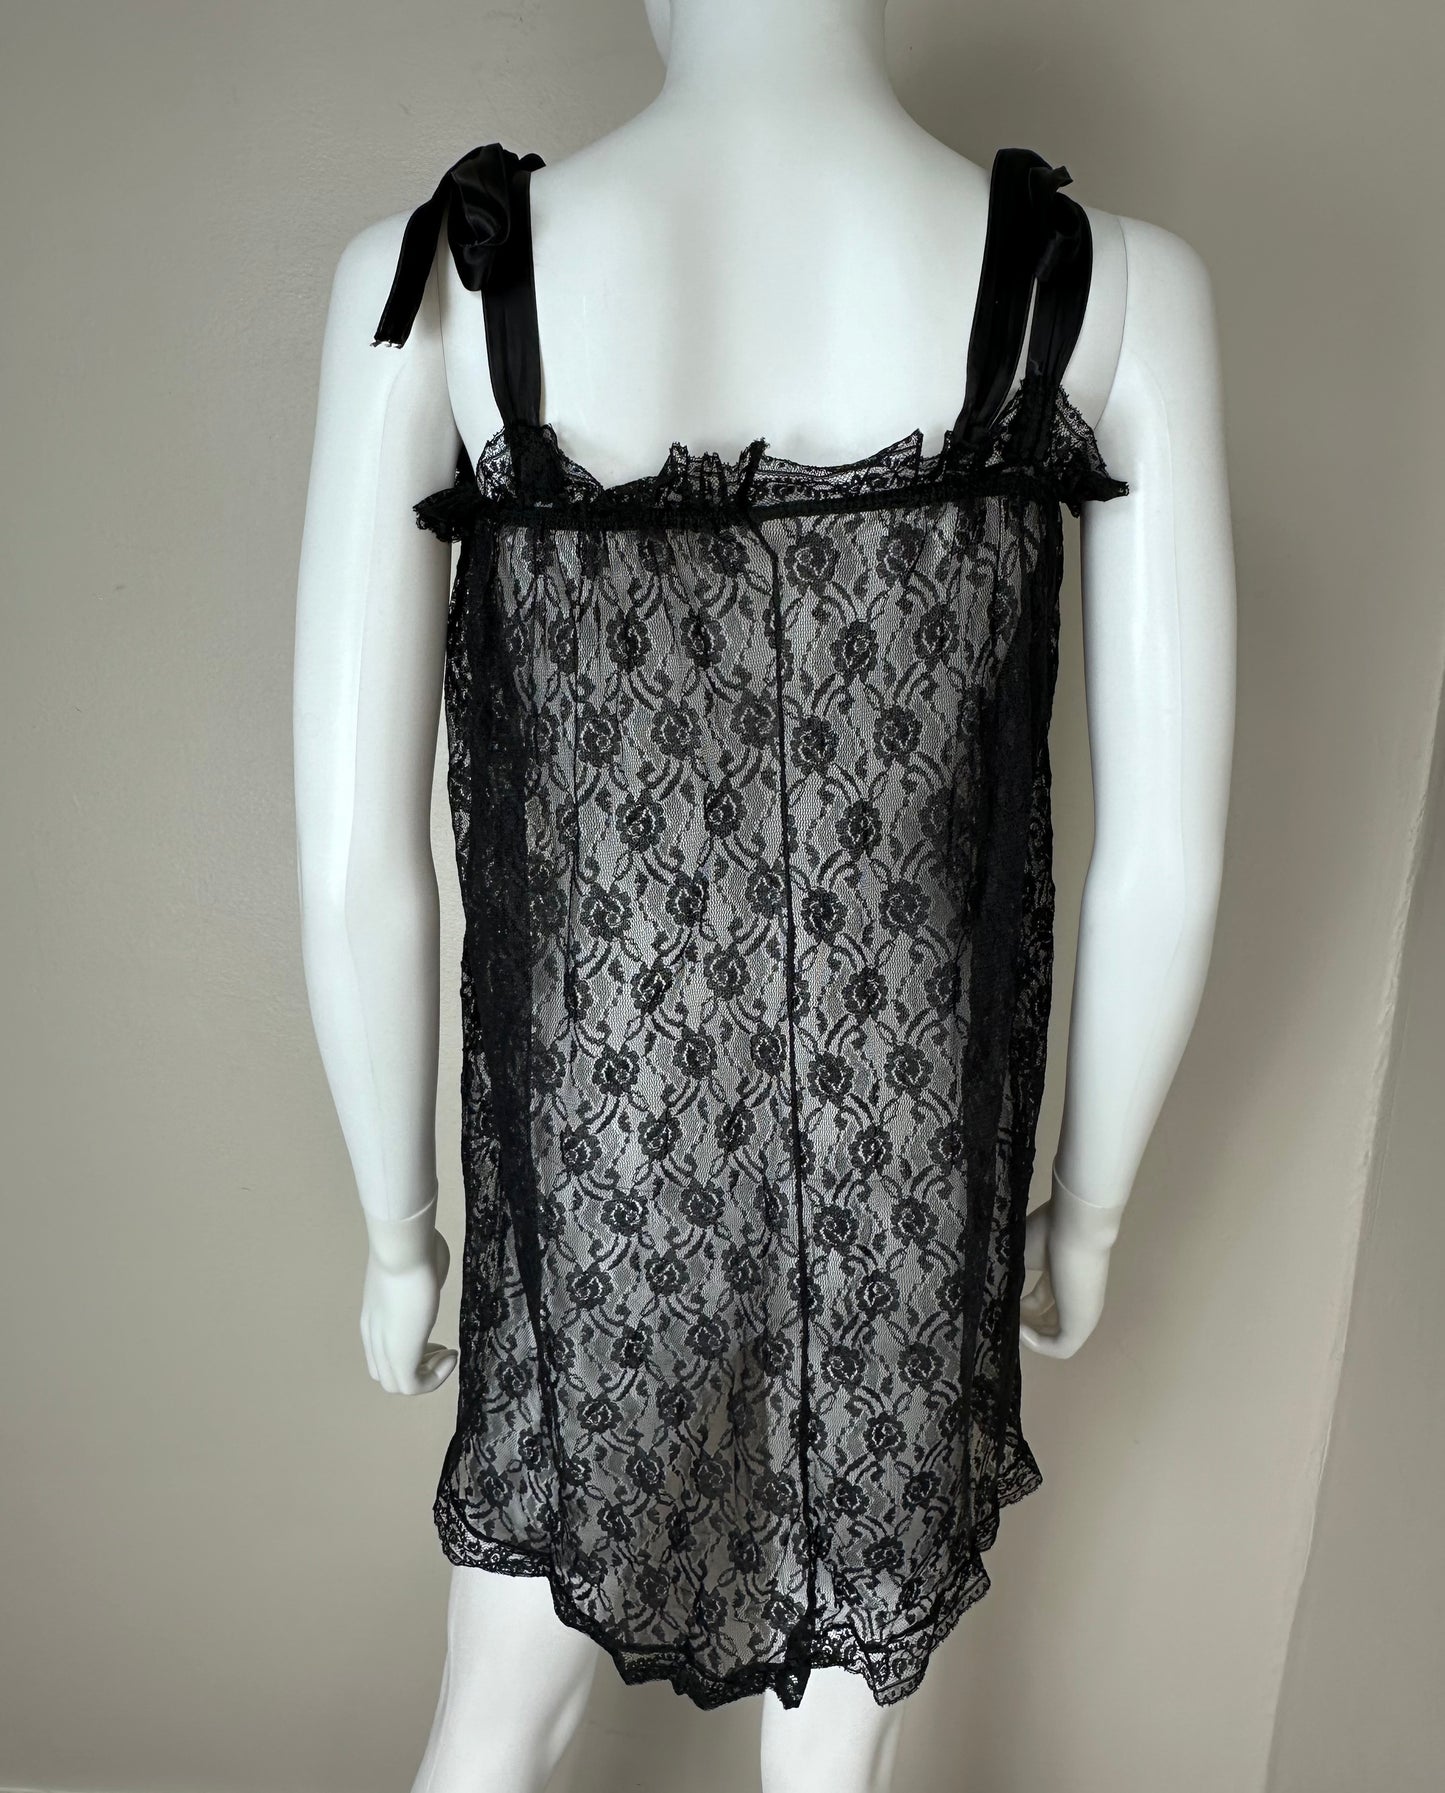 1960s Black Lace Baby Doll Nightgown, One Size, XS-Large